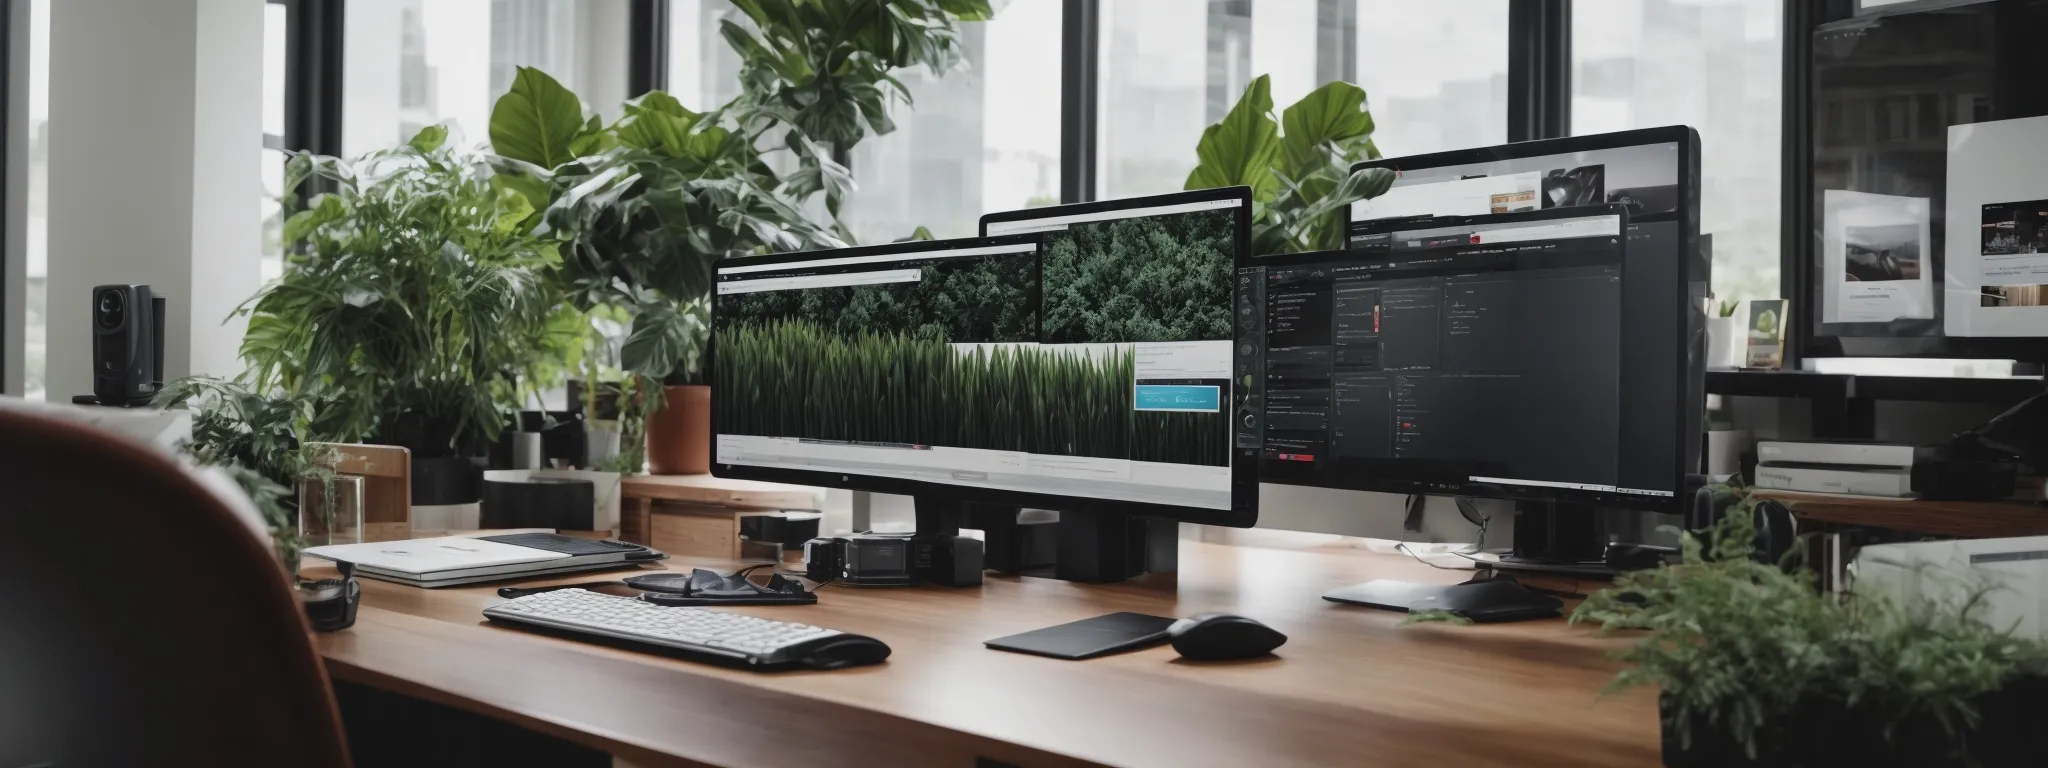 a panoramic view of an orderly modern home office, with a computer displaying a clean wordpress dashboard on the screen, surrounded by technology and flora, symbolizing a productive and seo-optimized workspace.